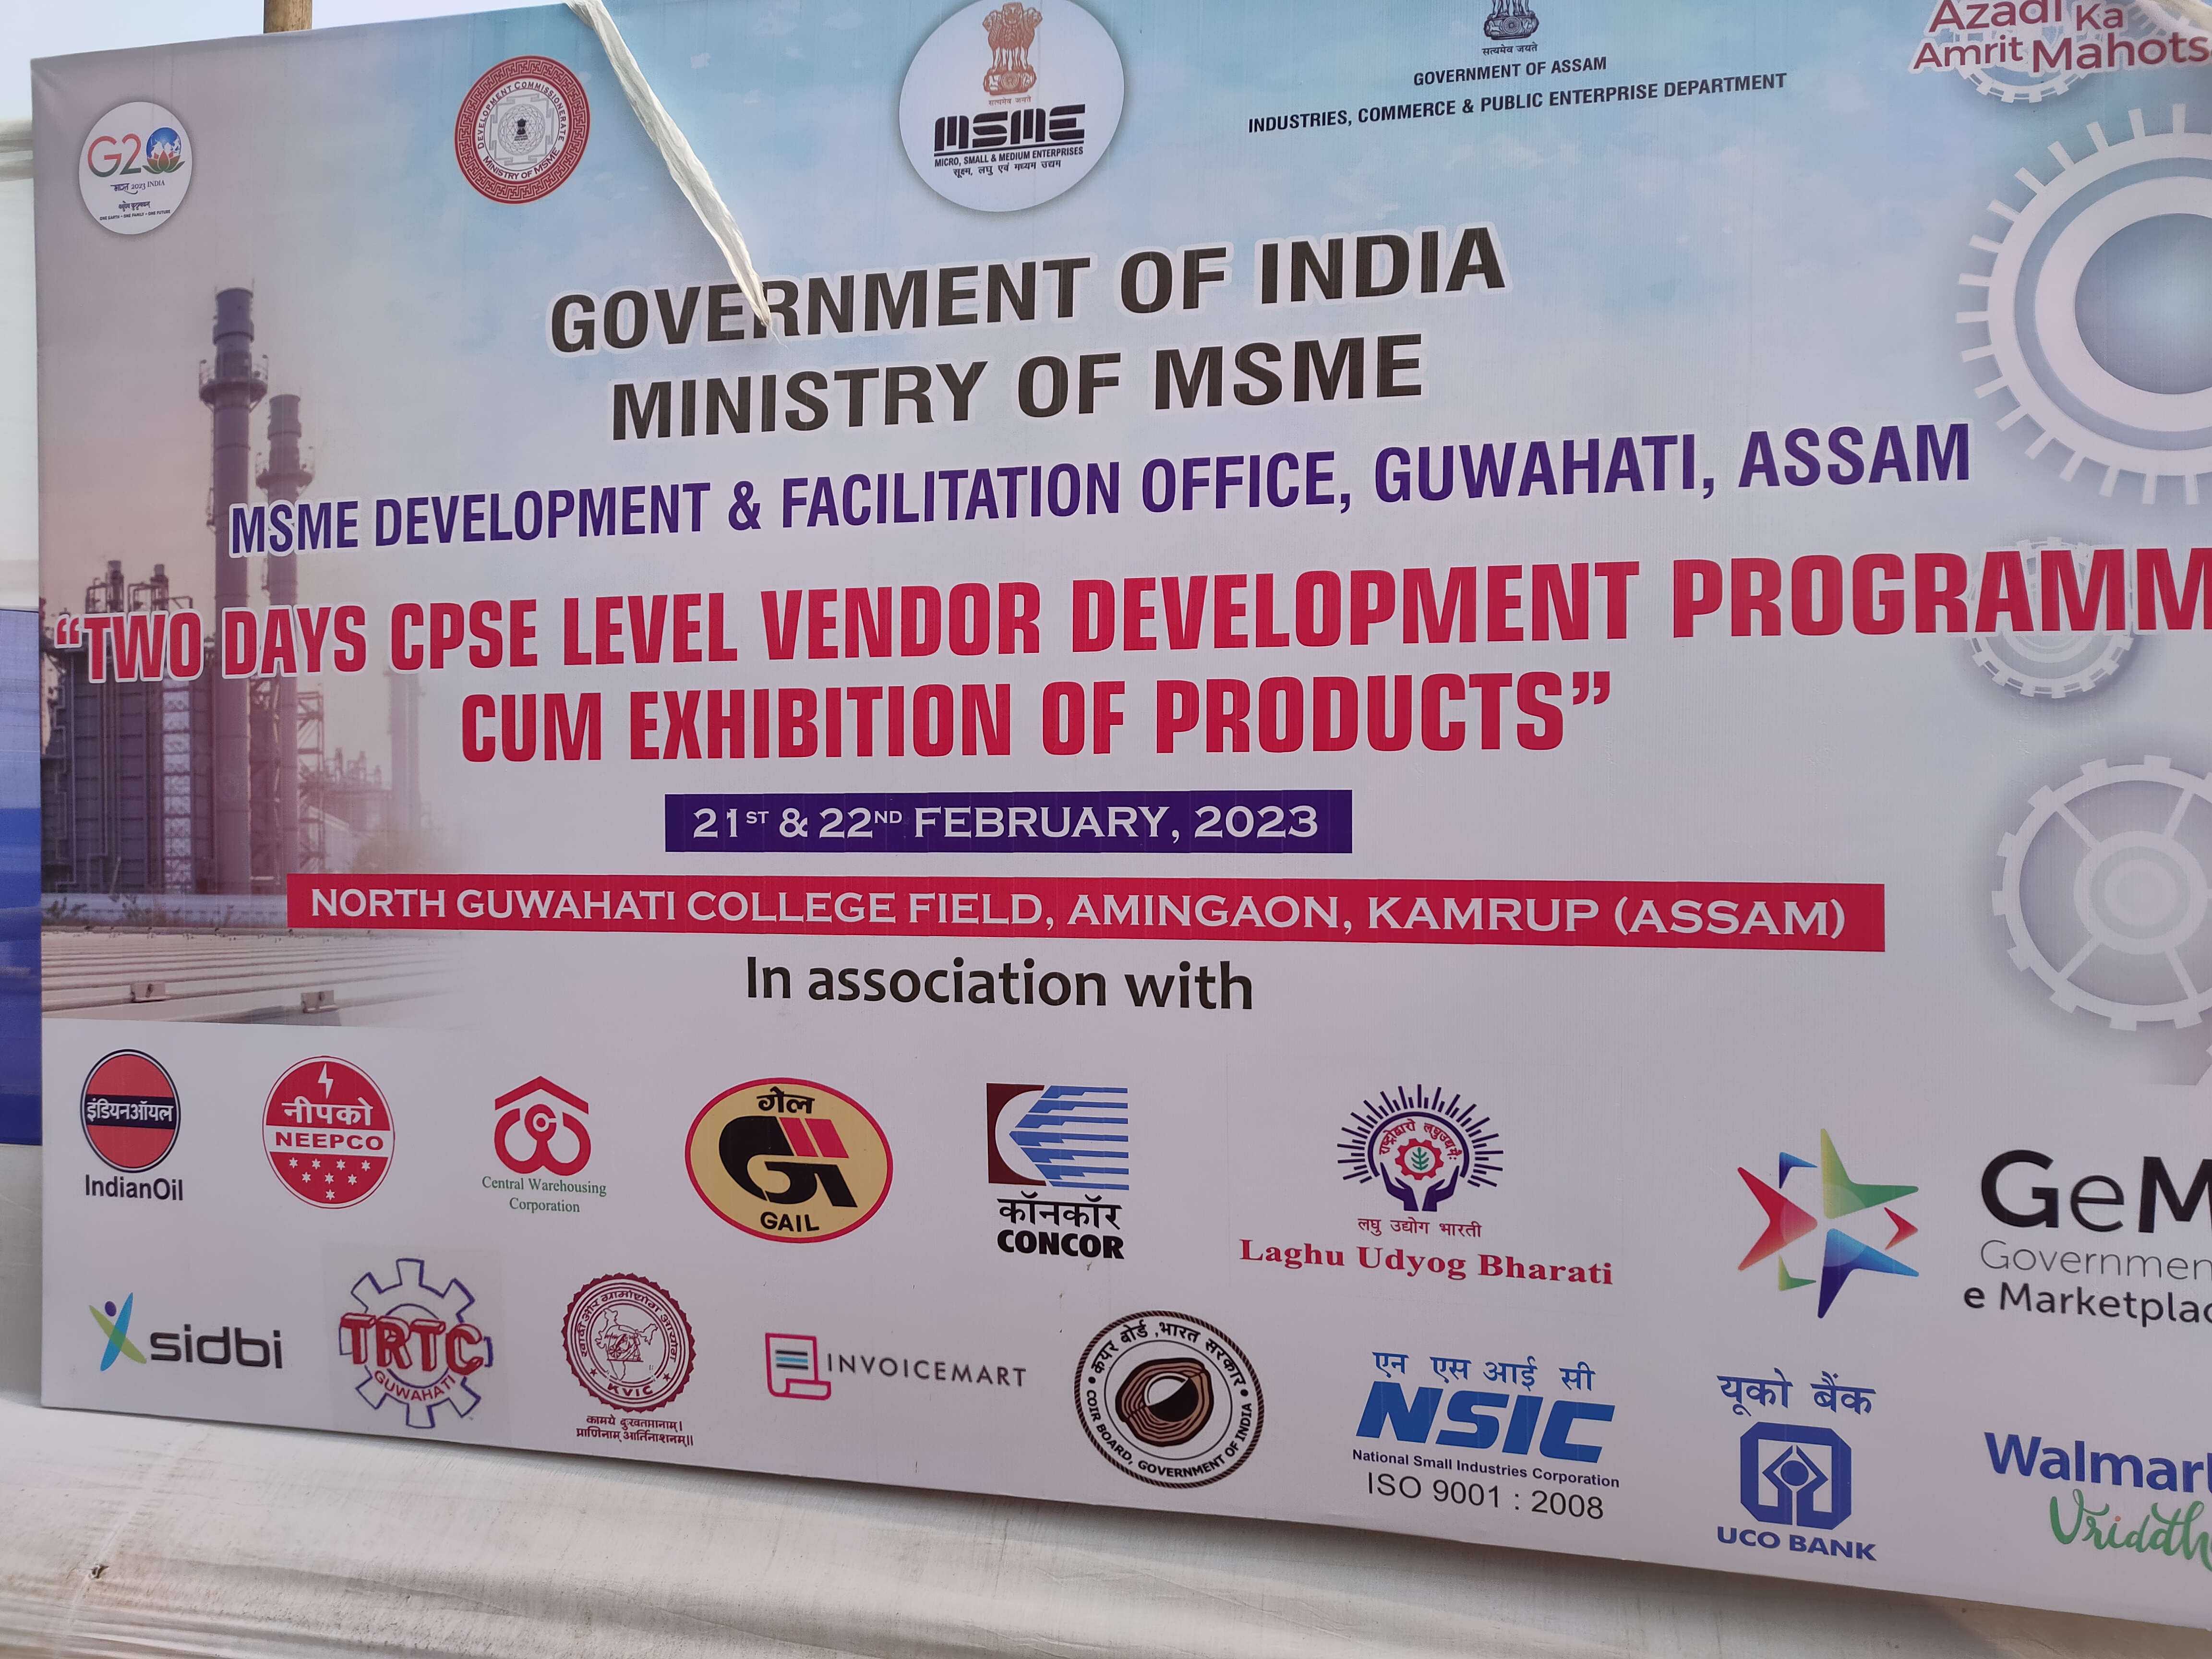 North Gauhati College field being used as a source/site for Govt. of India sponsored CPSE level development program cum exhibition from 21.02.2023 to 26.02.2023